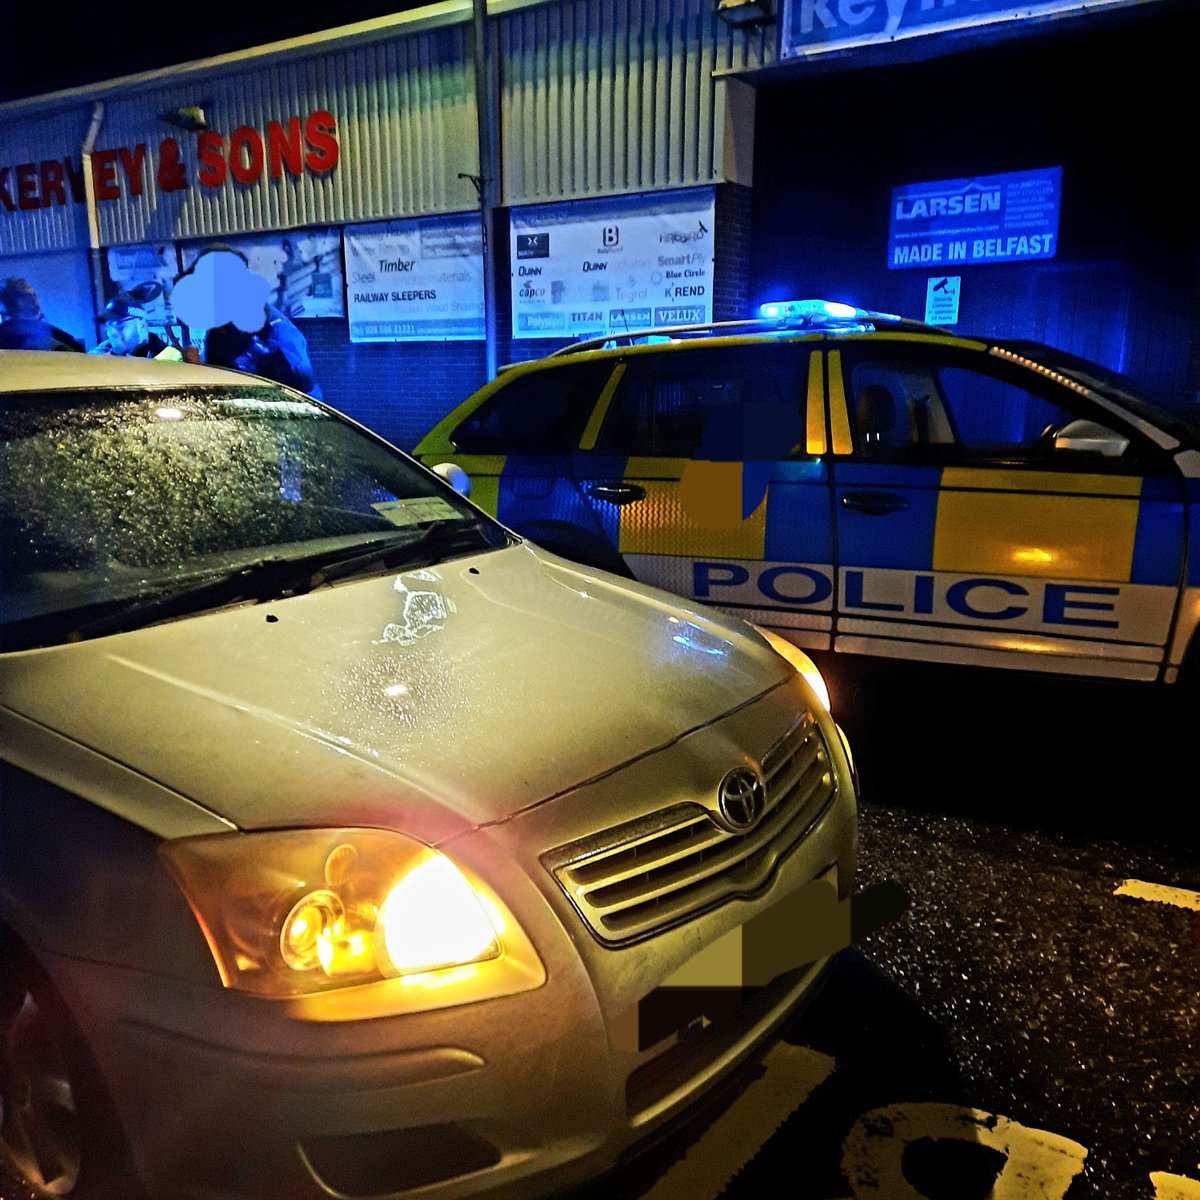 PURSUIT!!! District Support Team were assisted by Kesh NPT and Enniskillen RPU showing great teamwork to arrest a male for numerous motoring offences, 47 Theft Offences which include several Thefts from local churches, Robbery, Burglary and Criminal Damage.